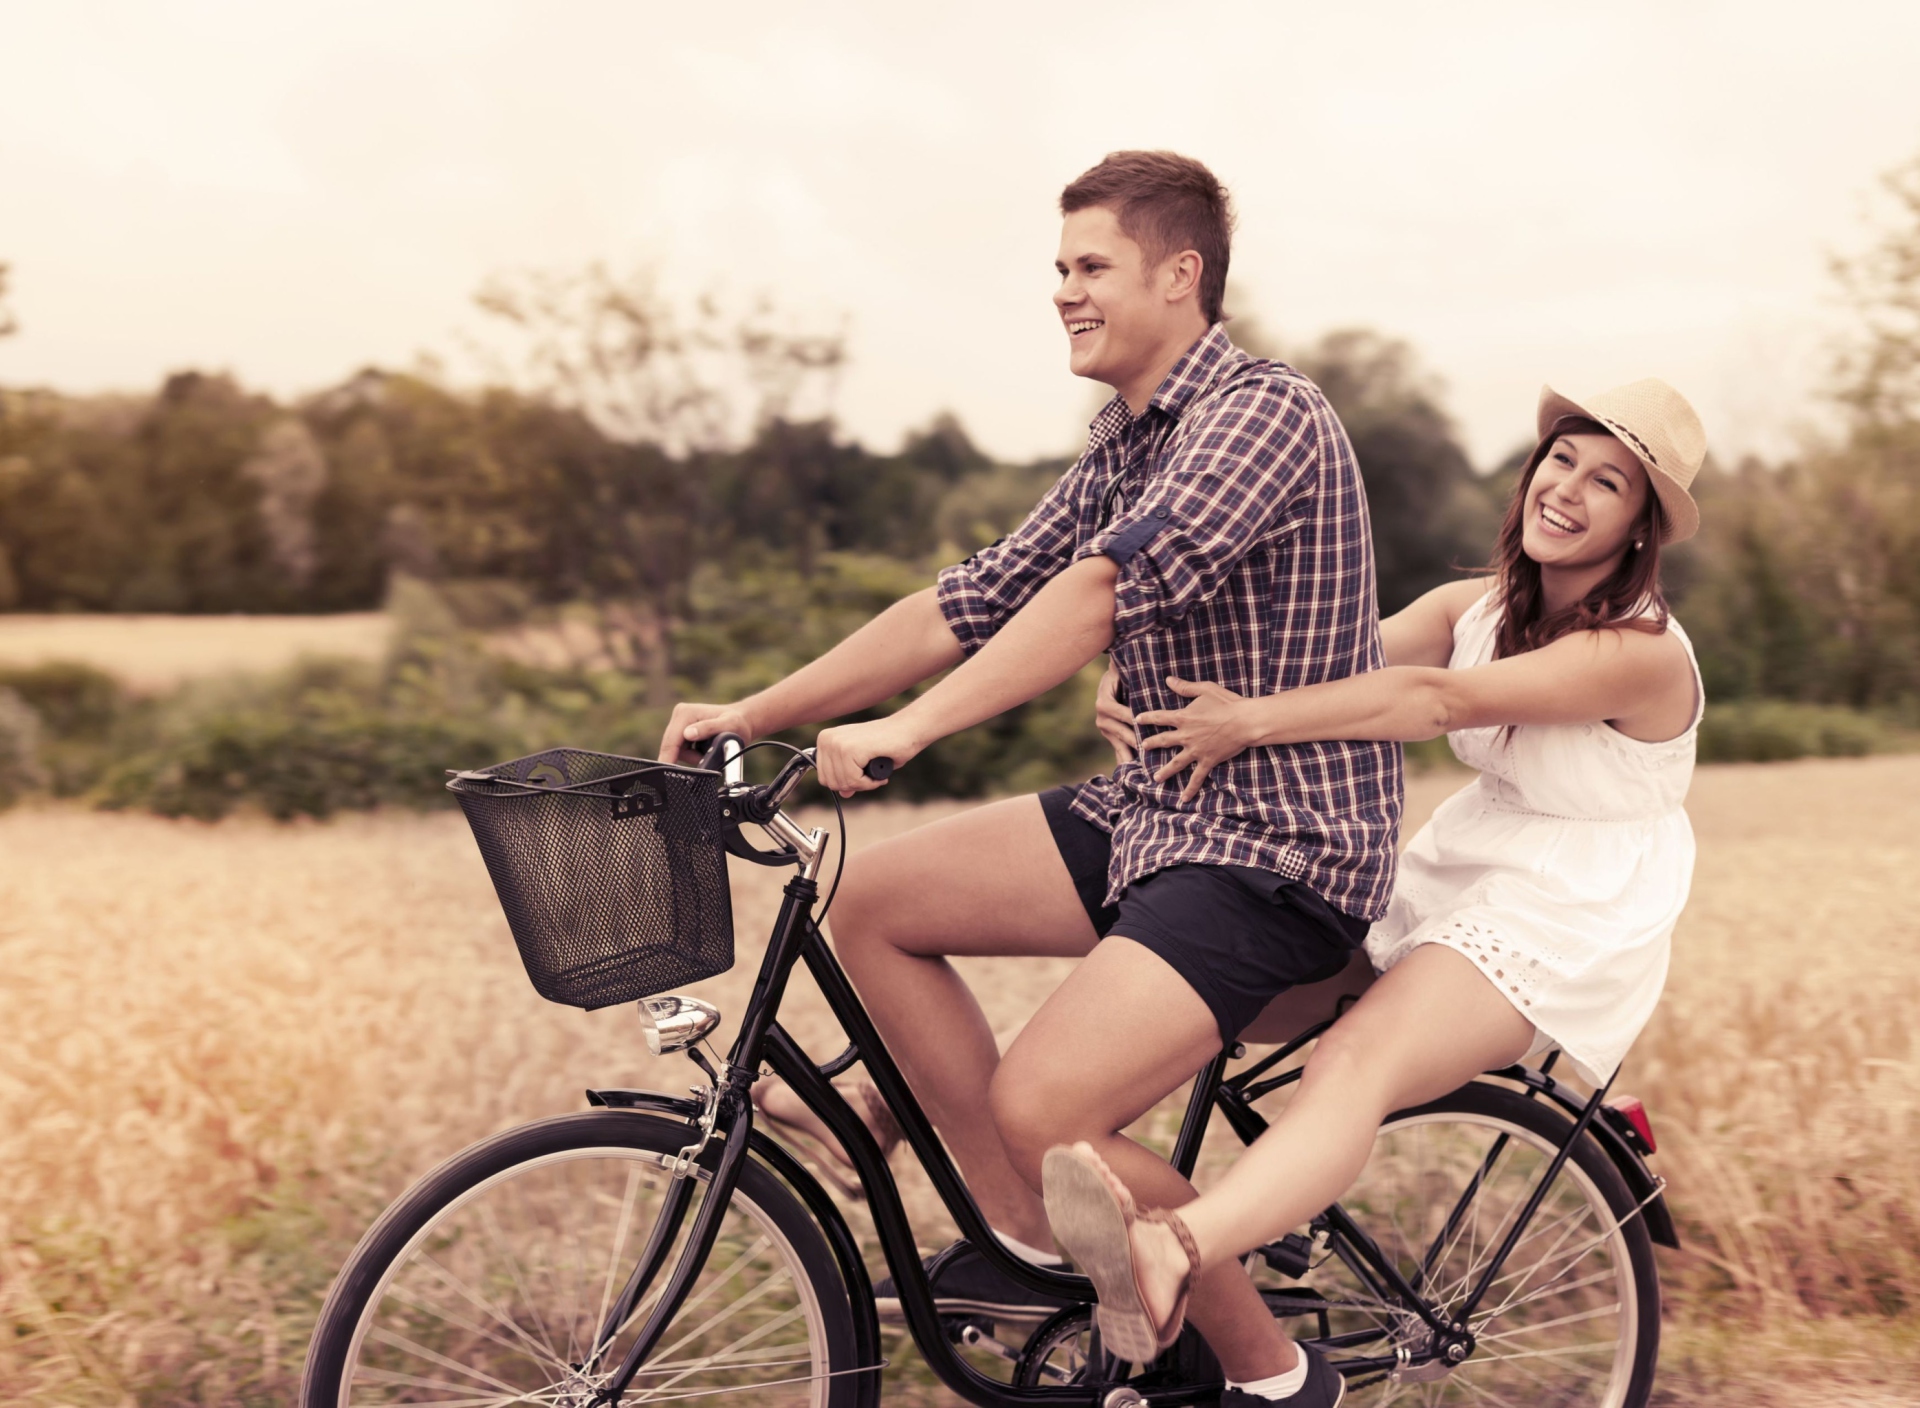 Couple On Bicycle wallpaper 1920x1408